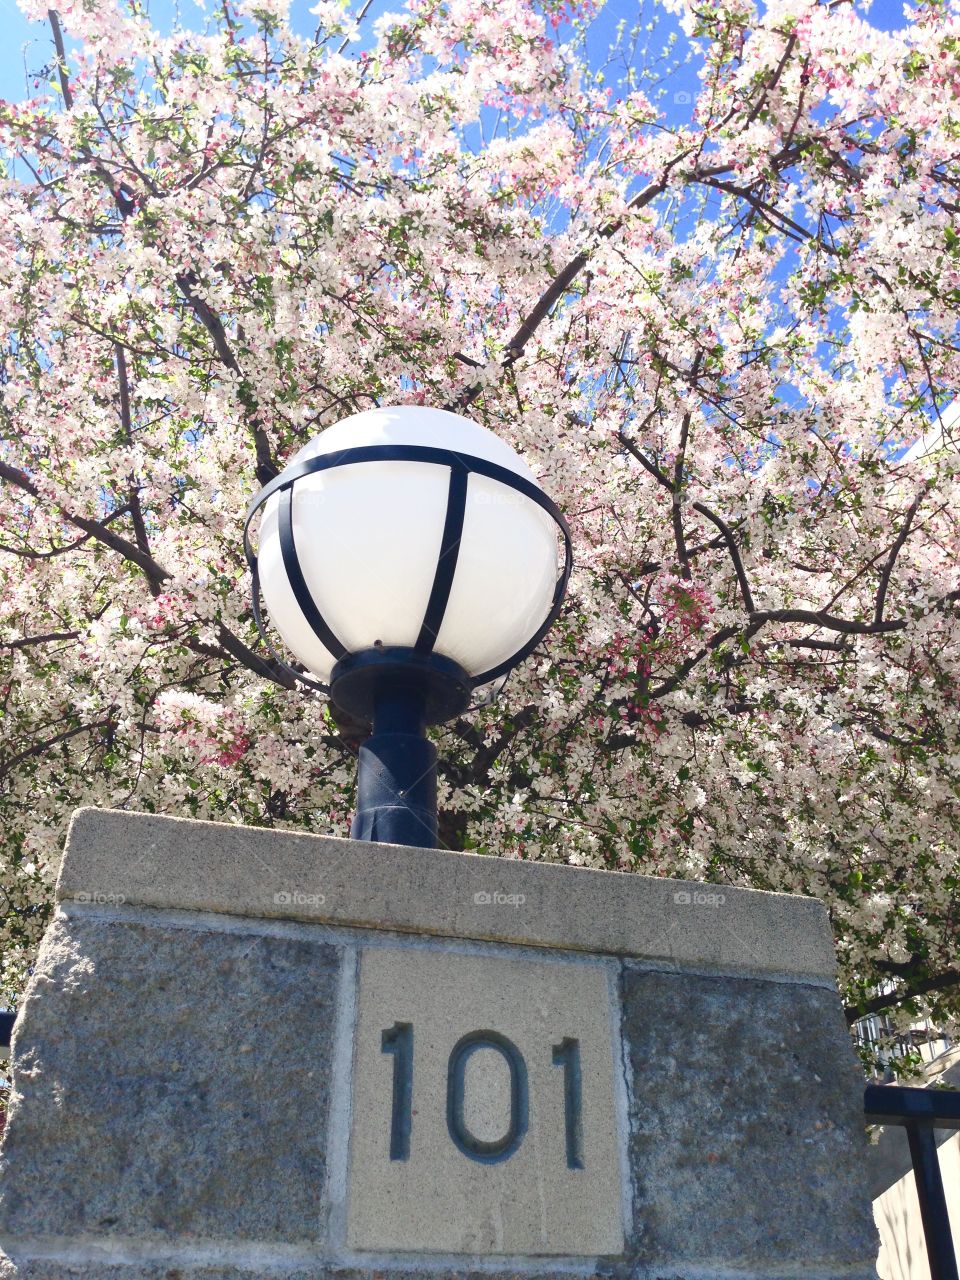 Light post in front of spring blooming trees